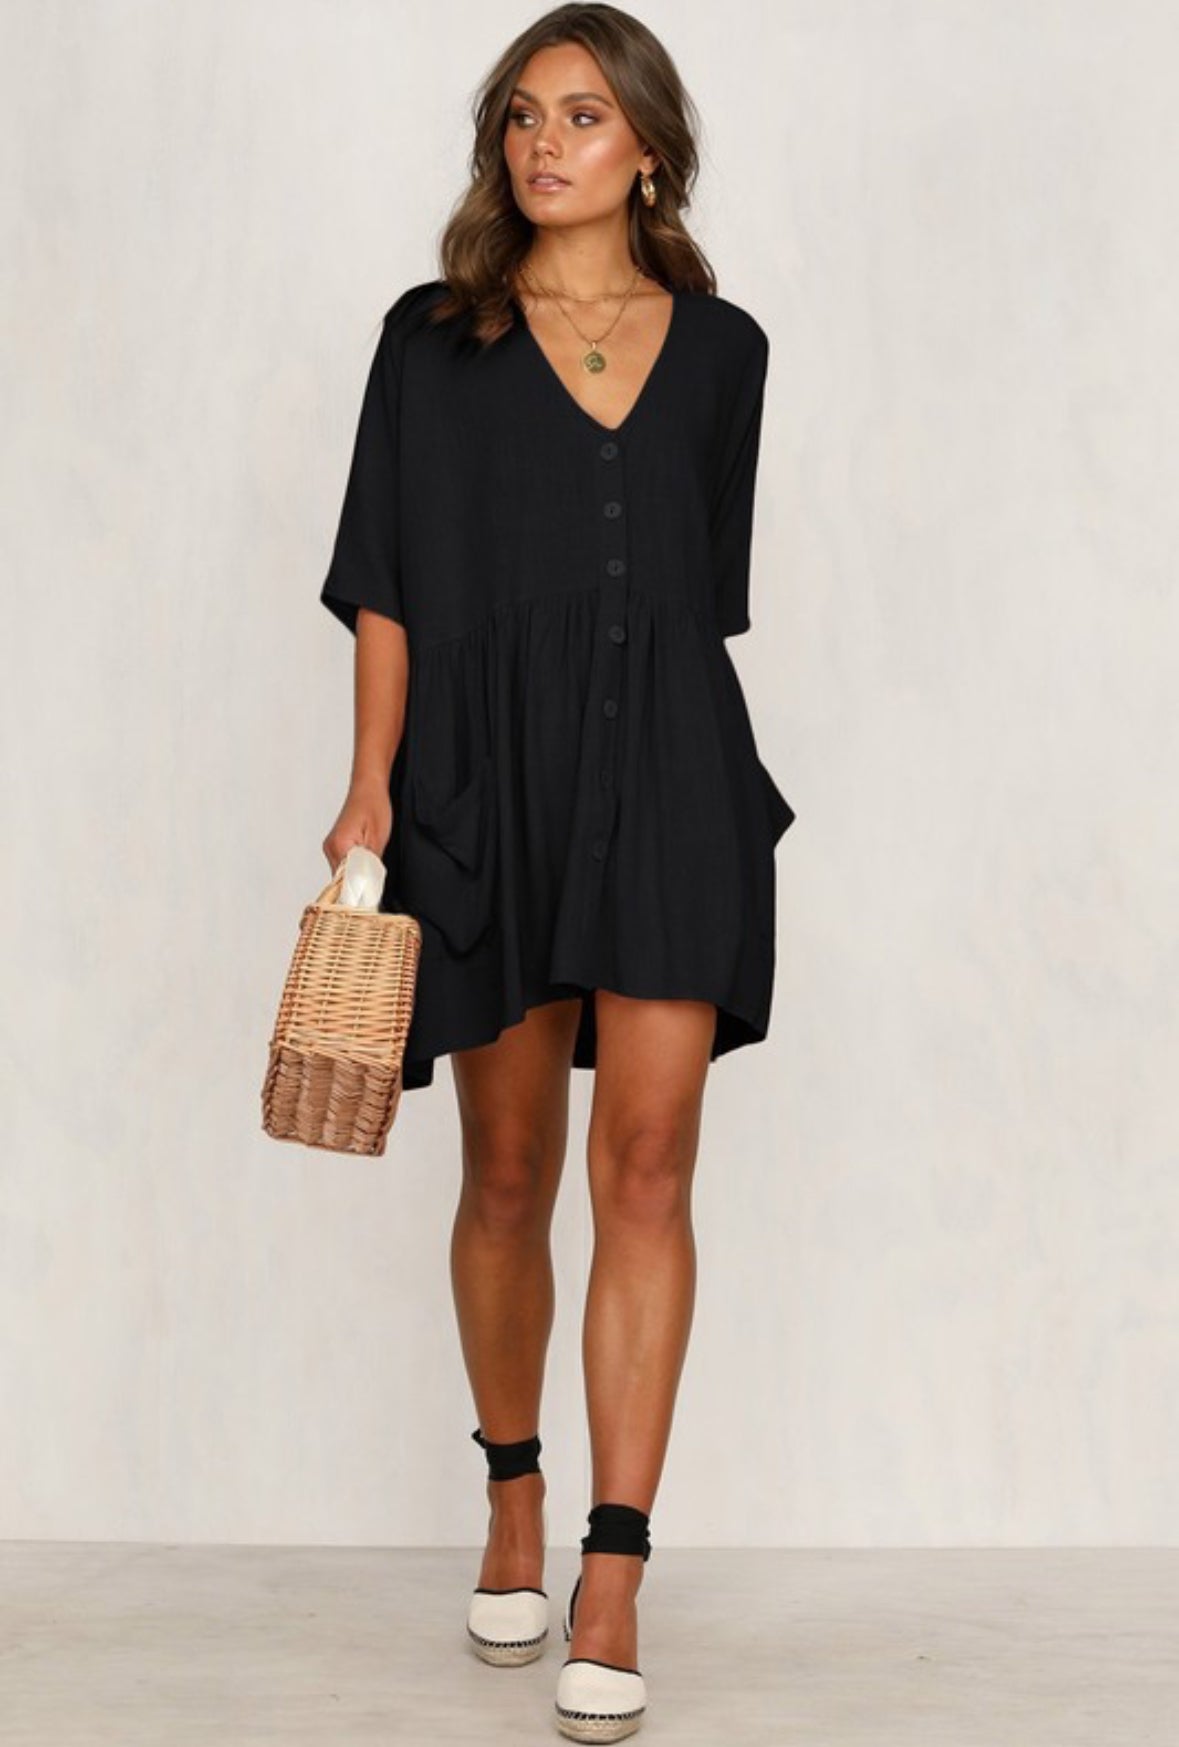 Beach Dress/Cover-Up in Black